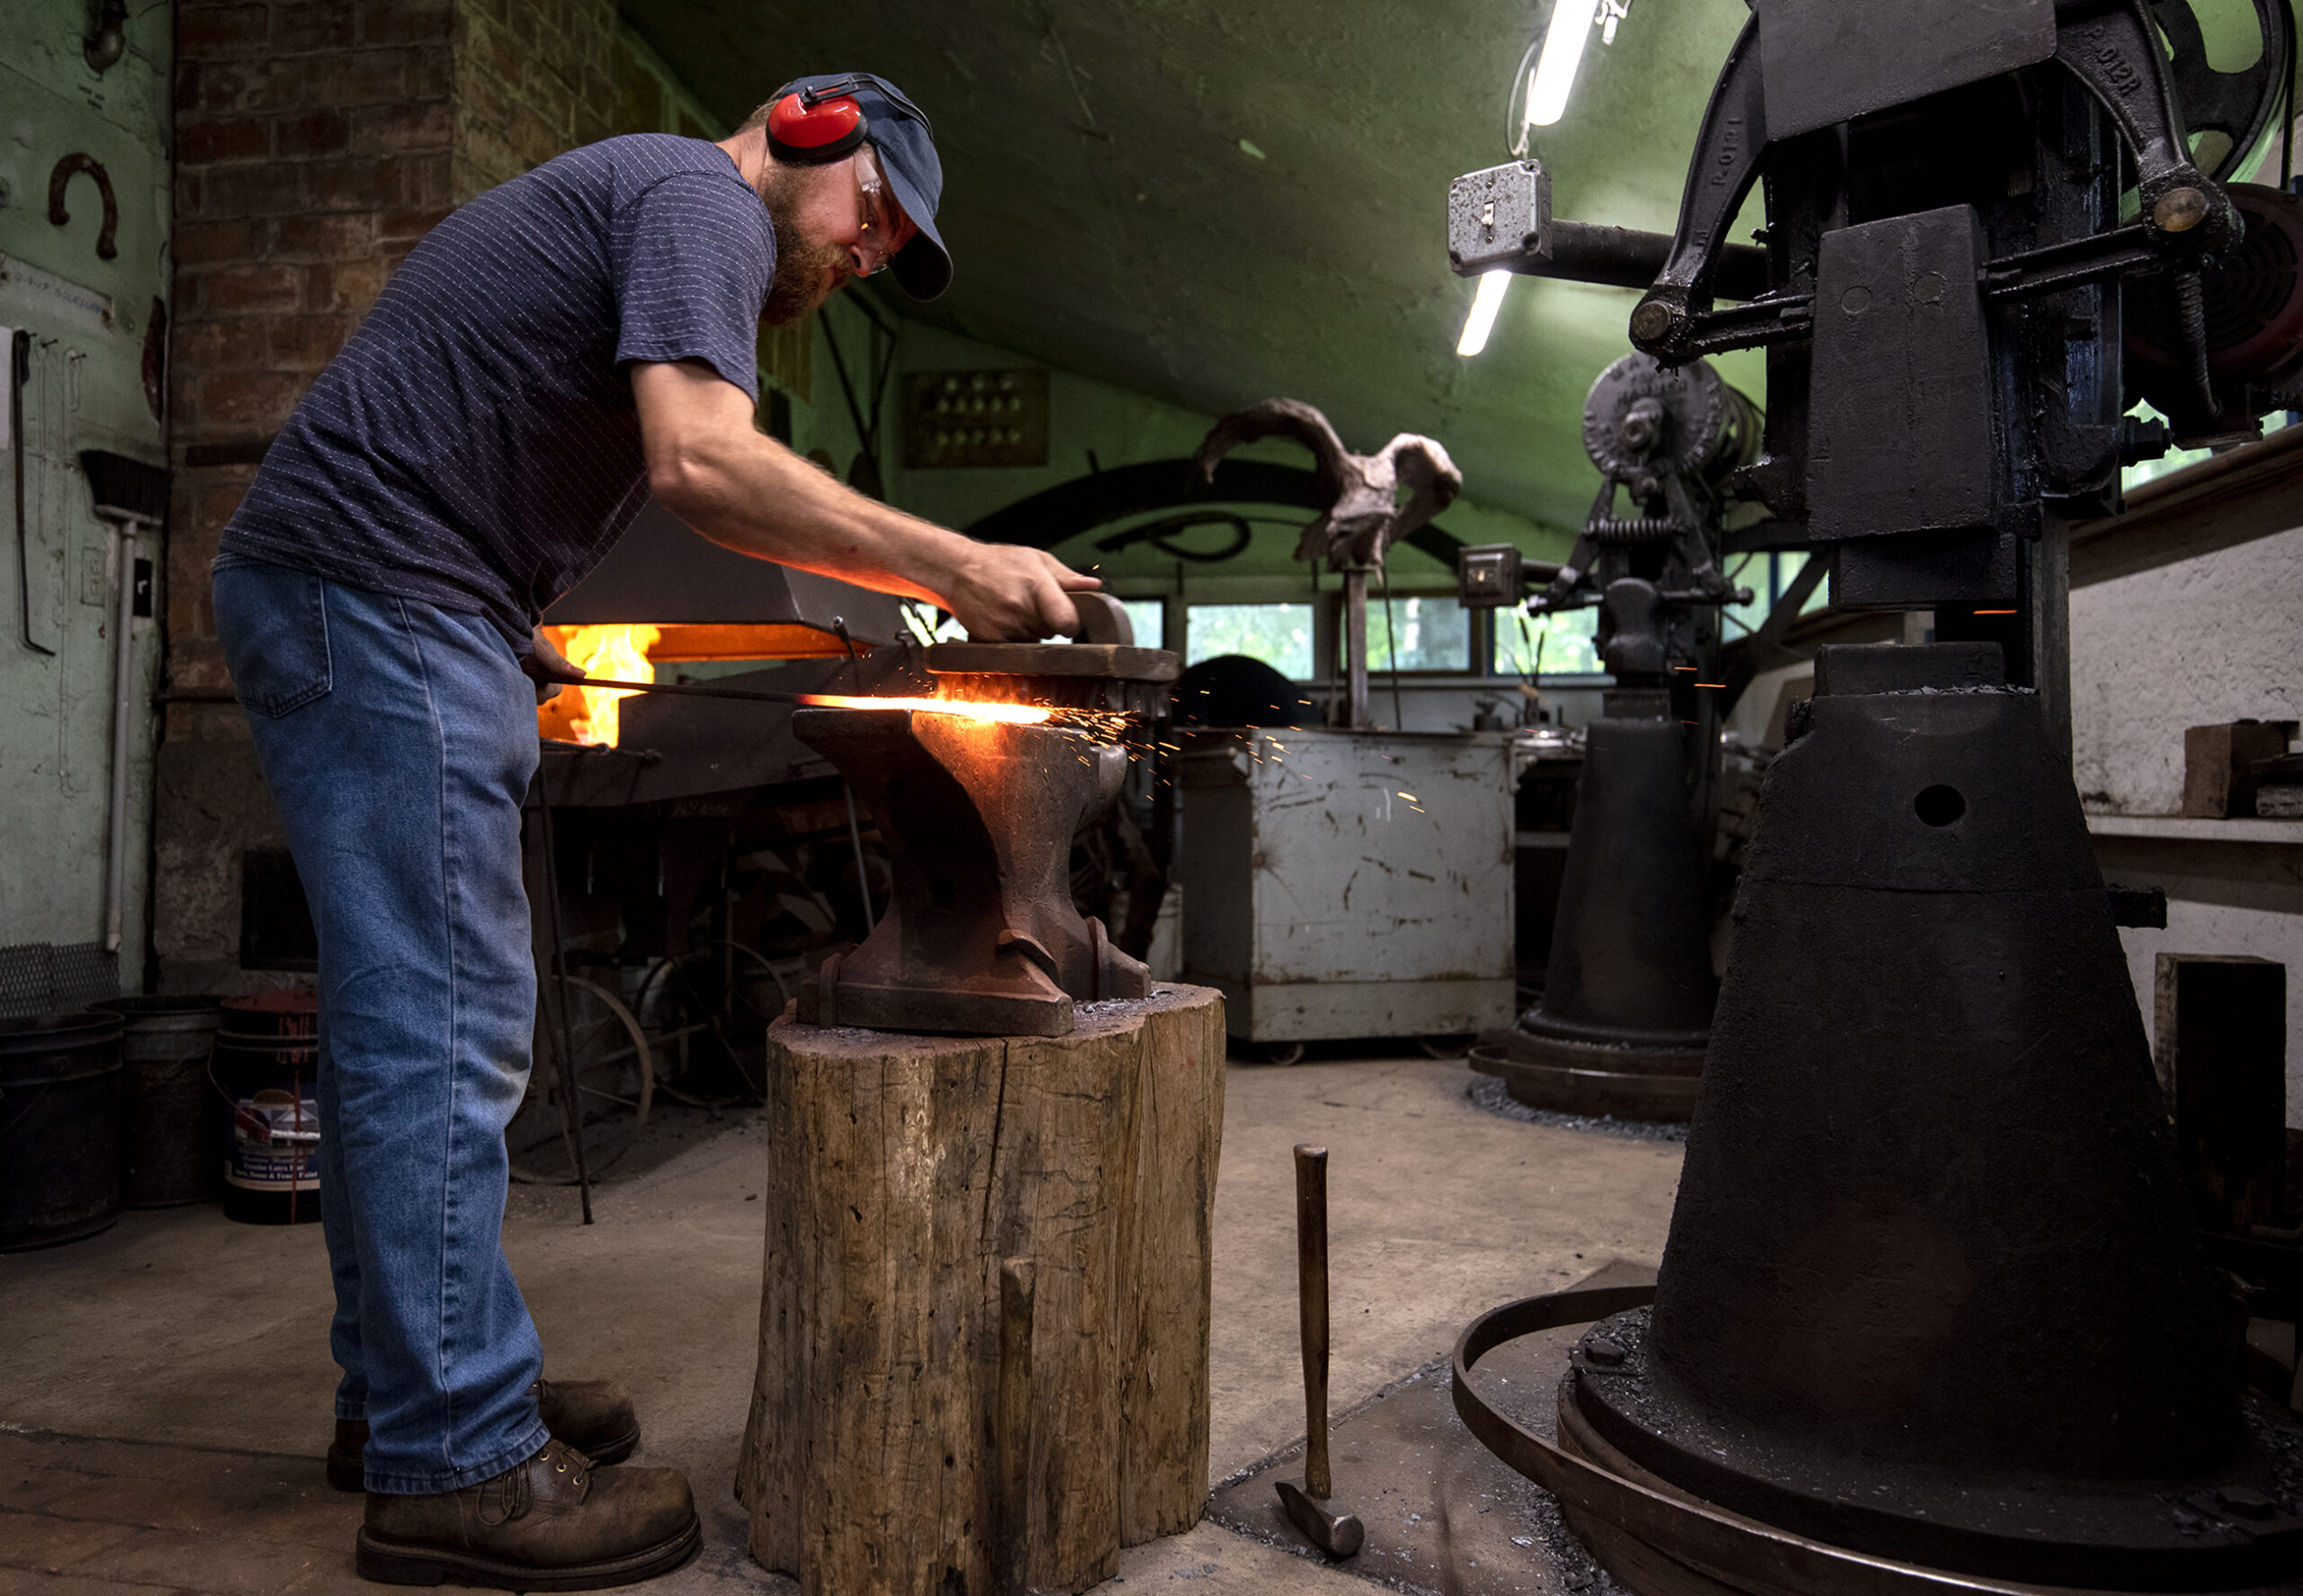 Vincent Kochanowski works with hot metal at the studio Tuesday, June 29, 2021, in Junction City, Wis.